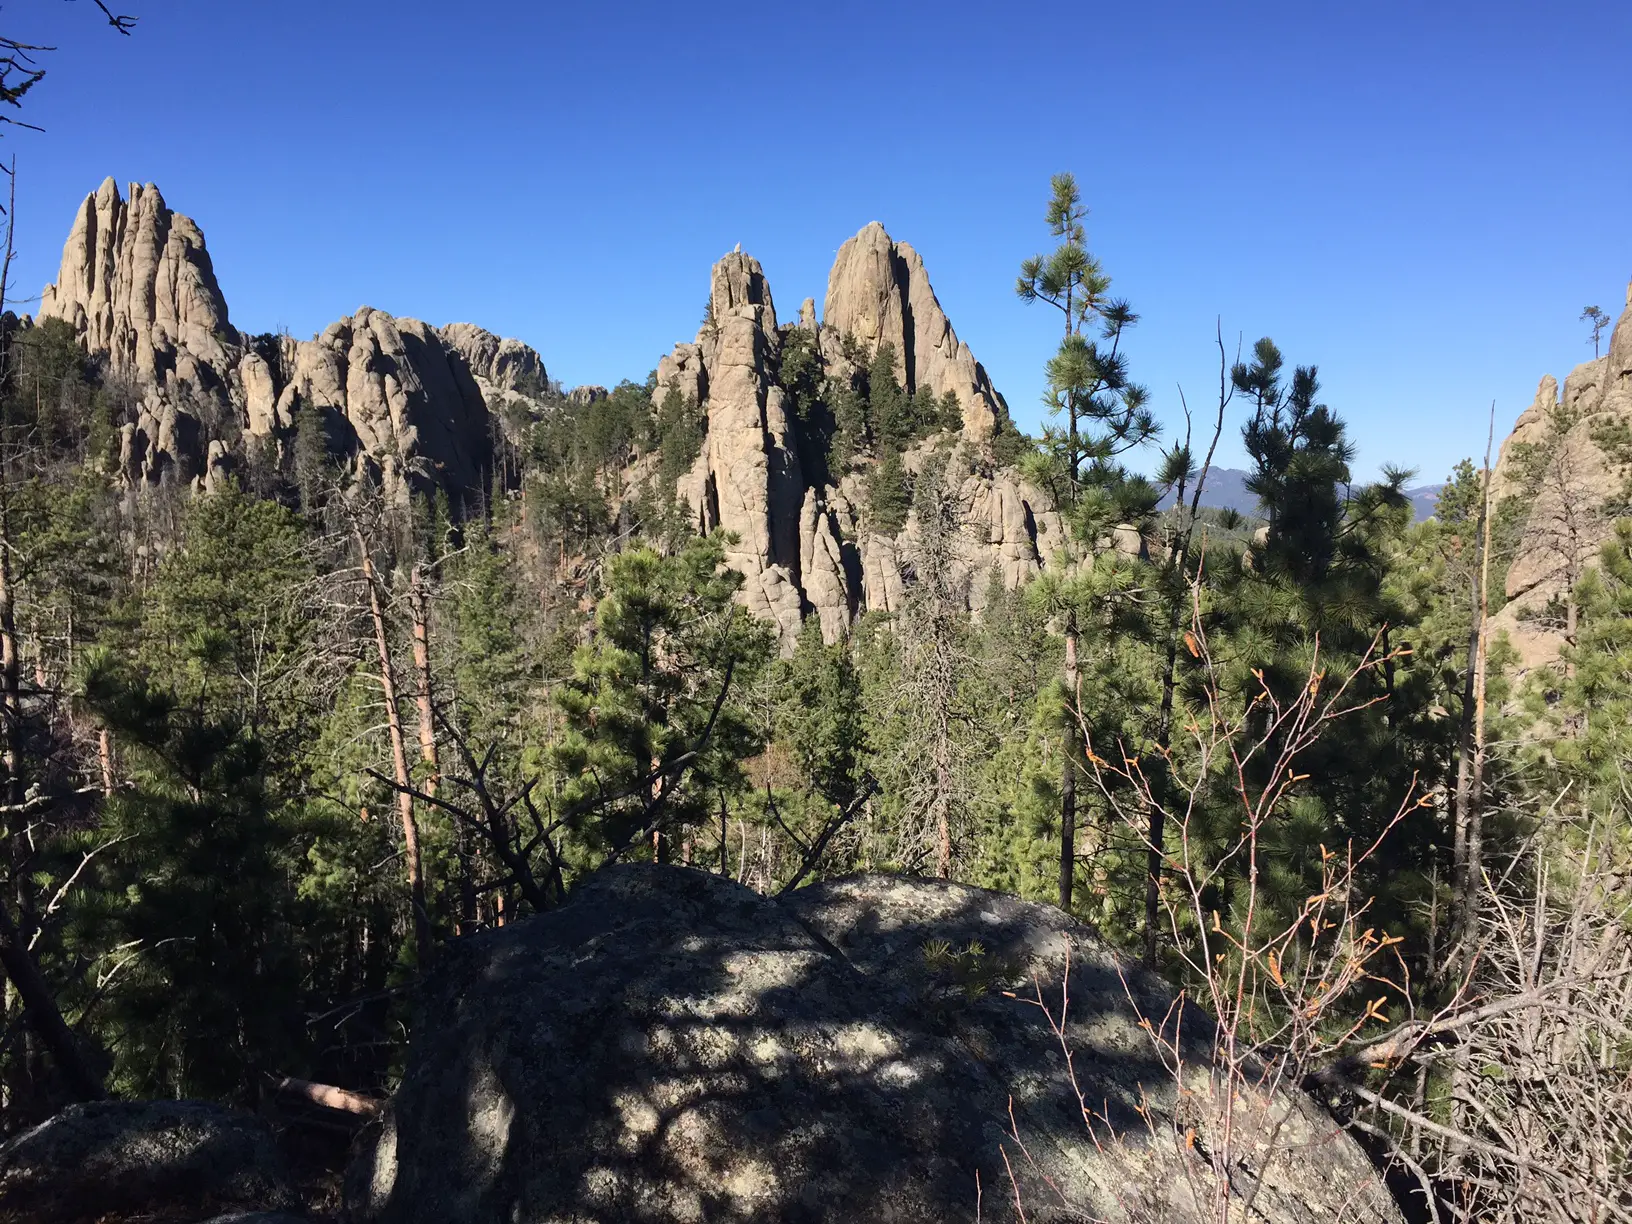 Rock spires rise above the green, pine forest, all under a clear, blue sky